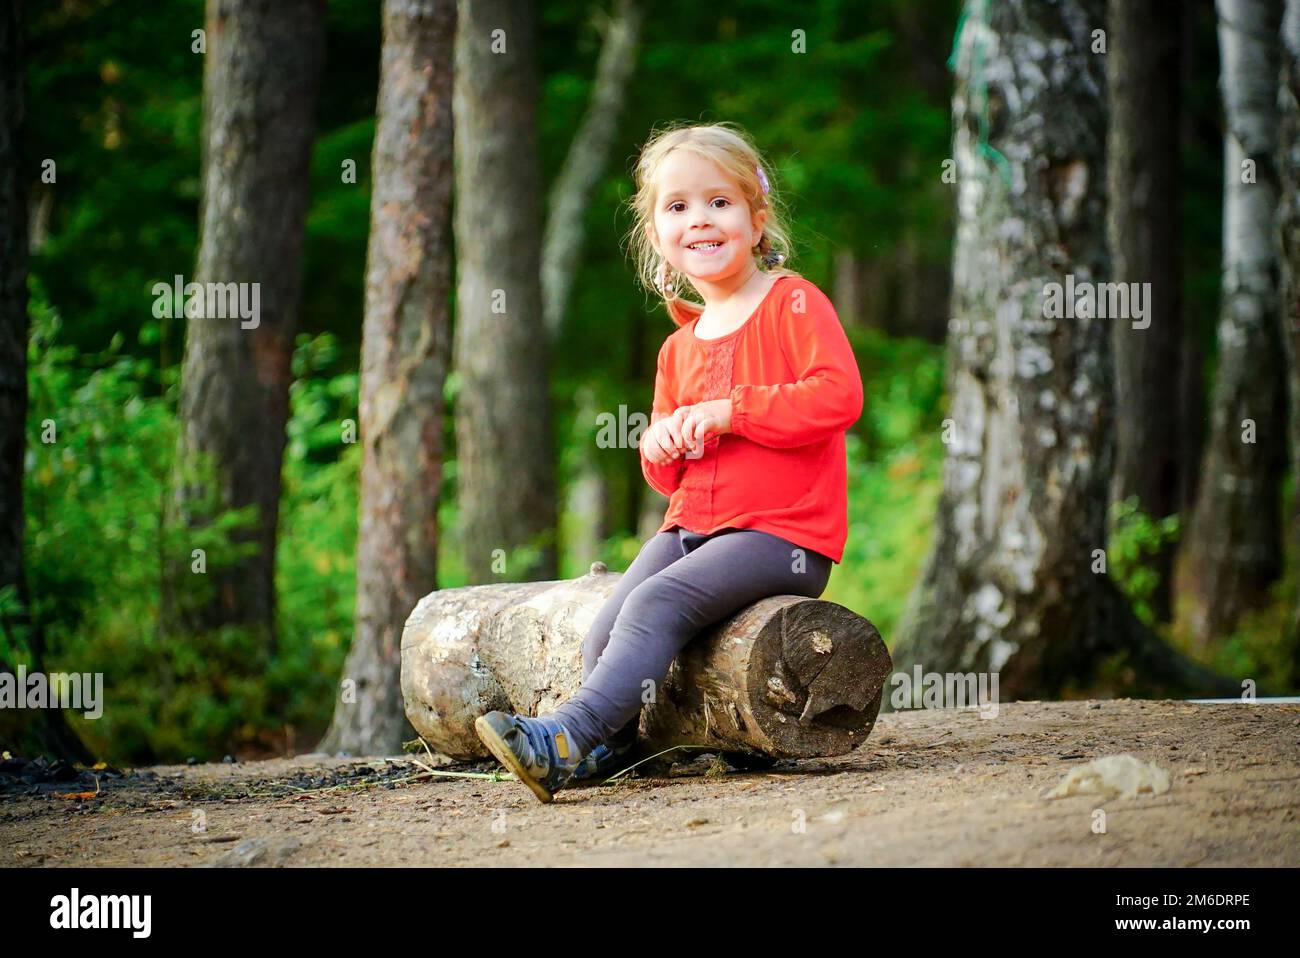 A small 3 year old cheerful girl is sitting on a log in the forest. Stock Photo